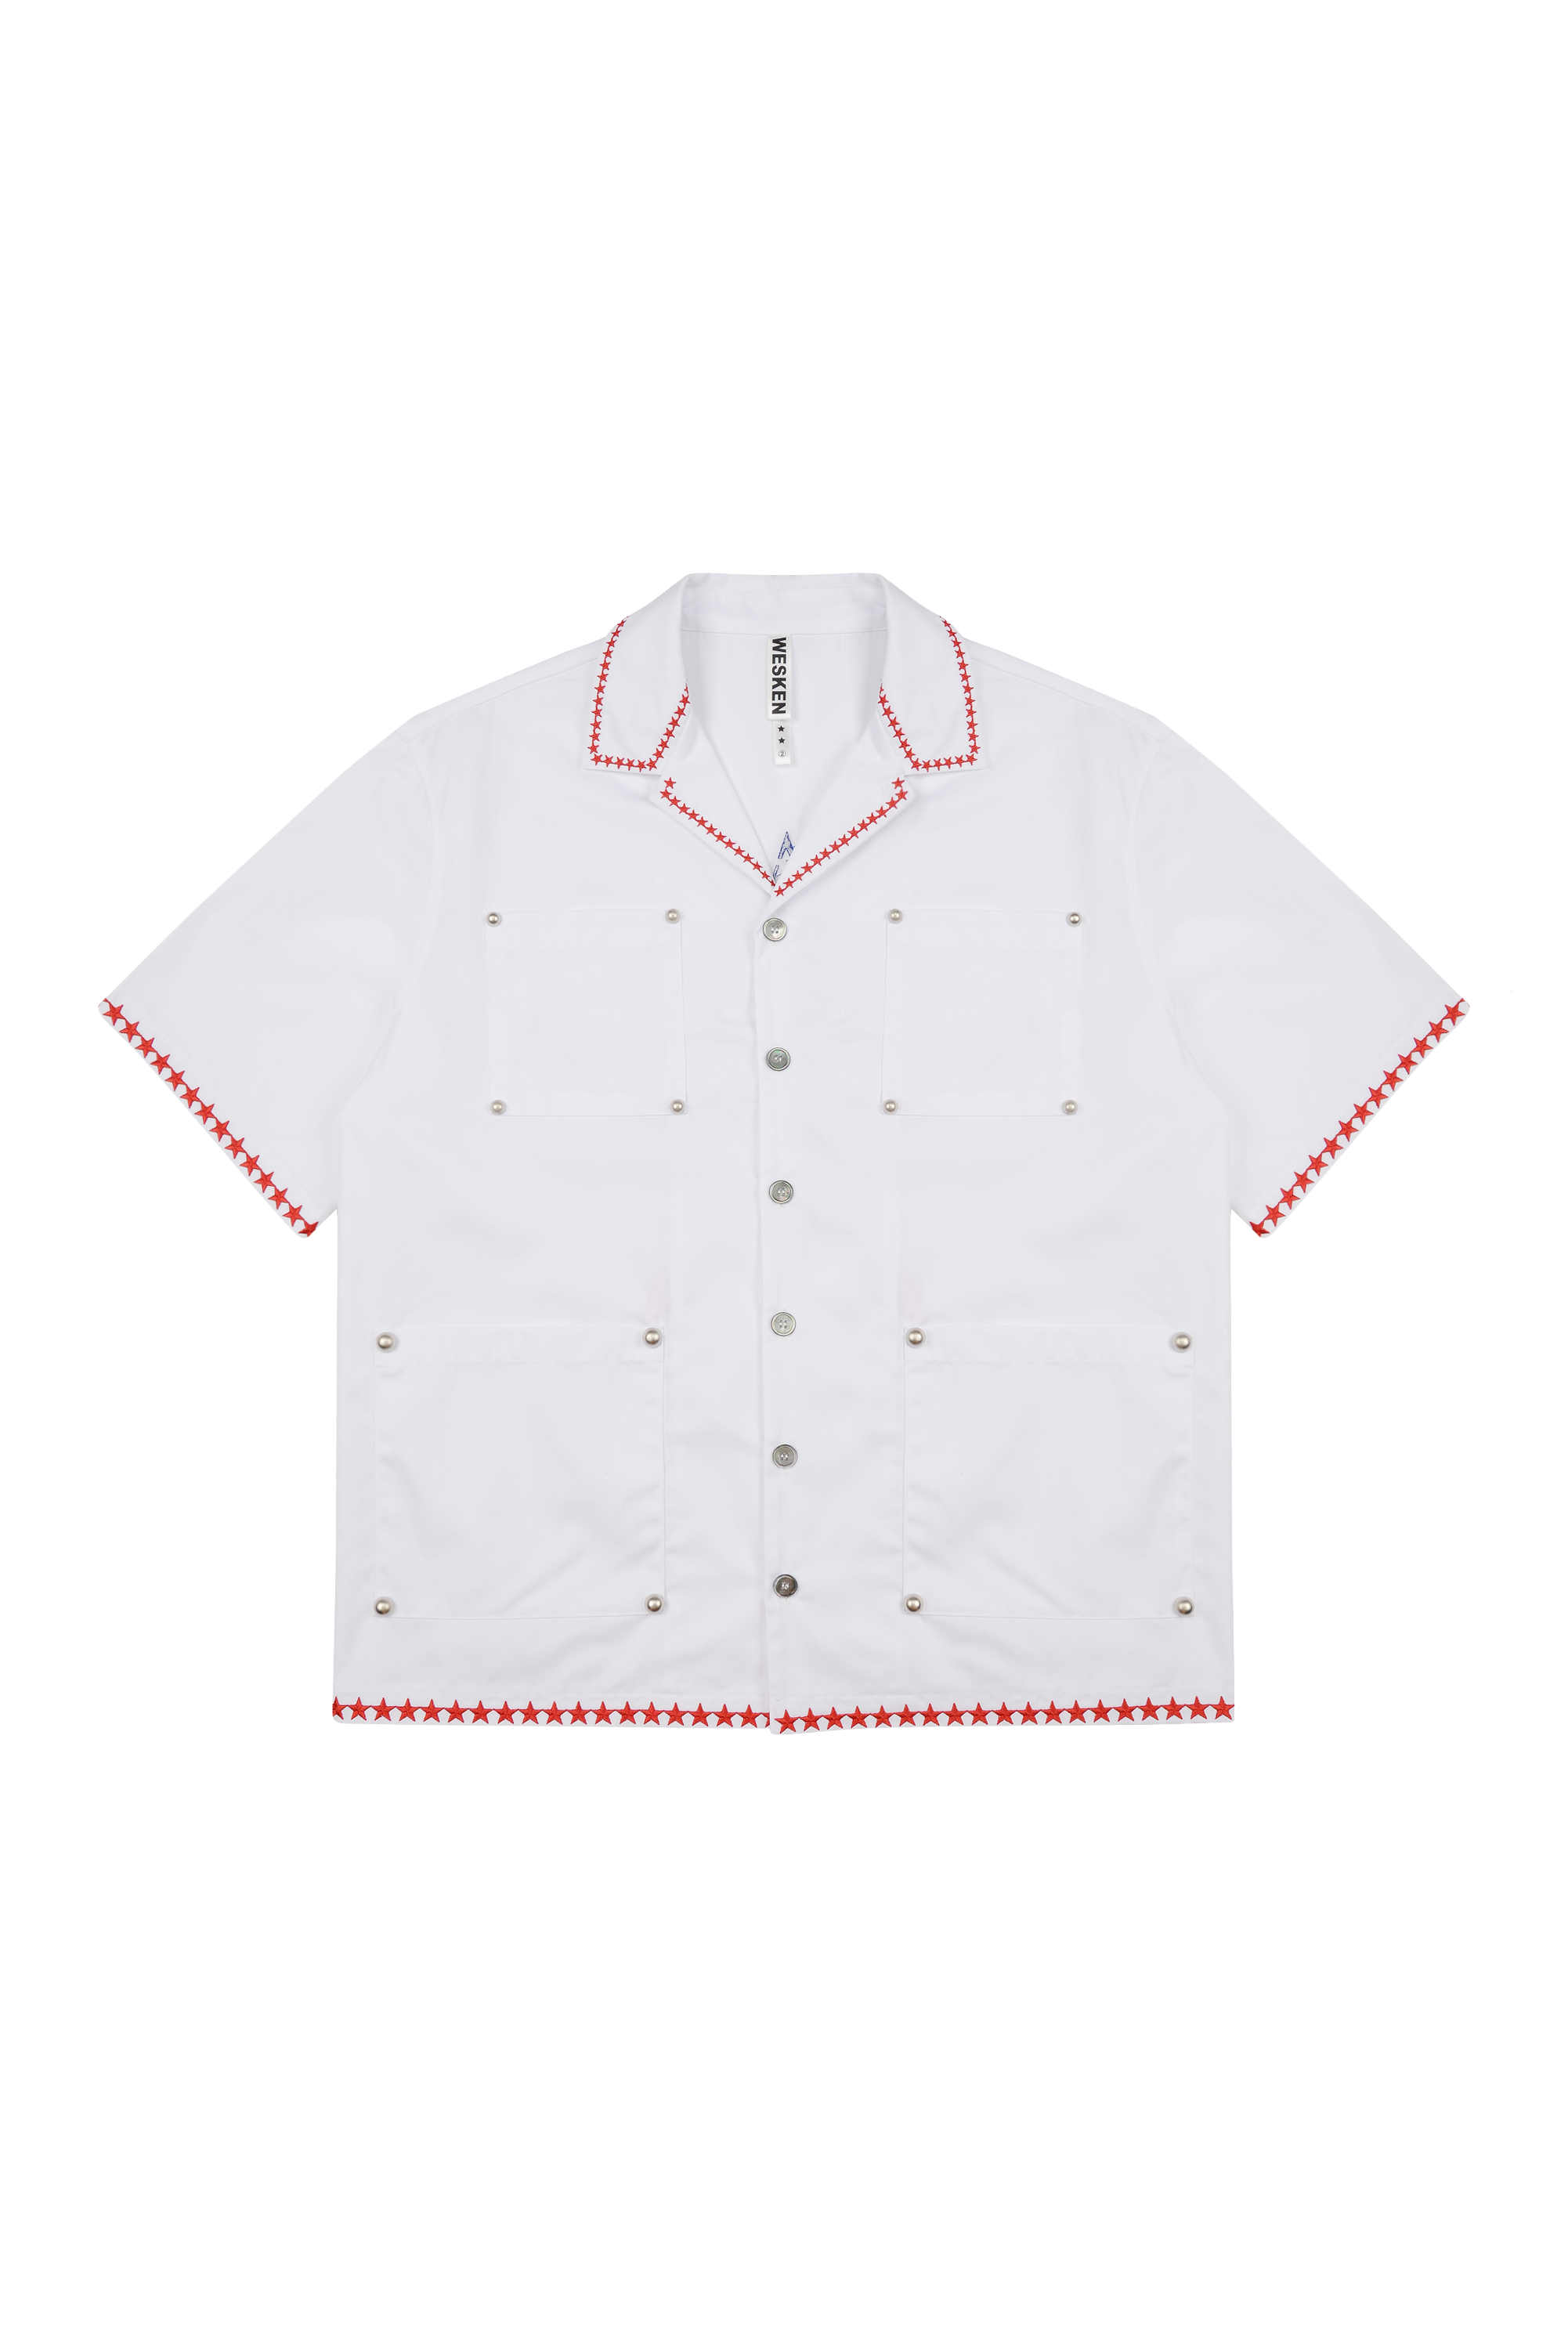 STAR EMBROIDERY SHIRT (WHITE)